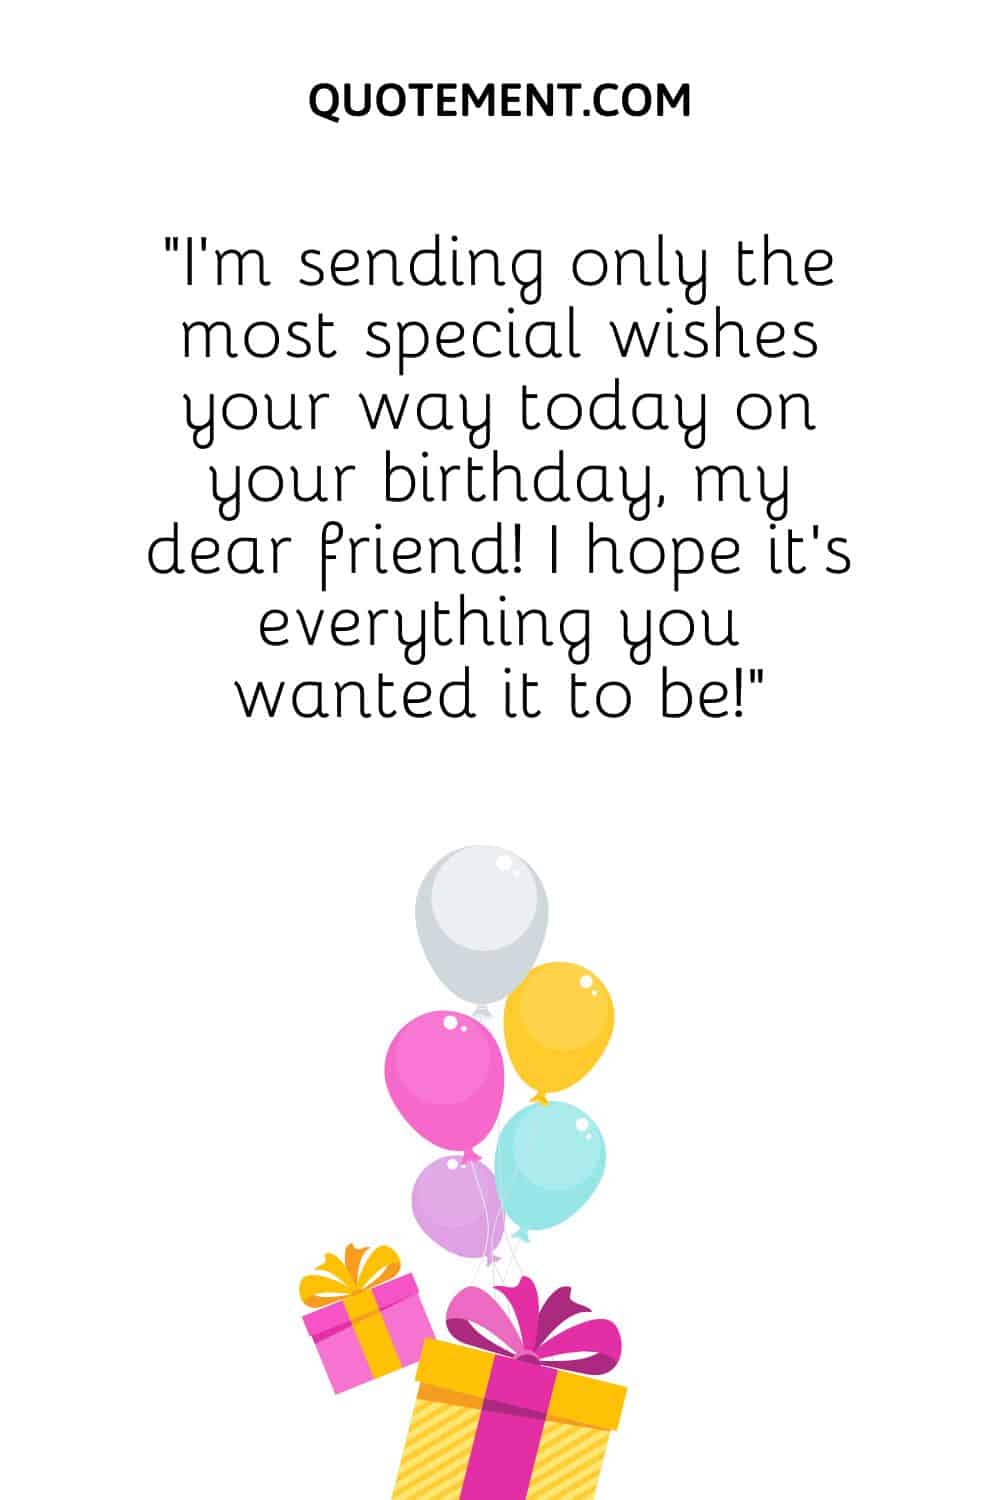 I’m sending only the most special wishes your way today on your birthday